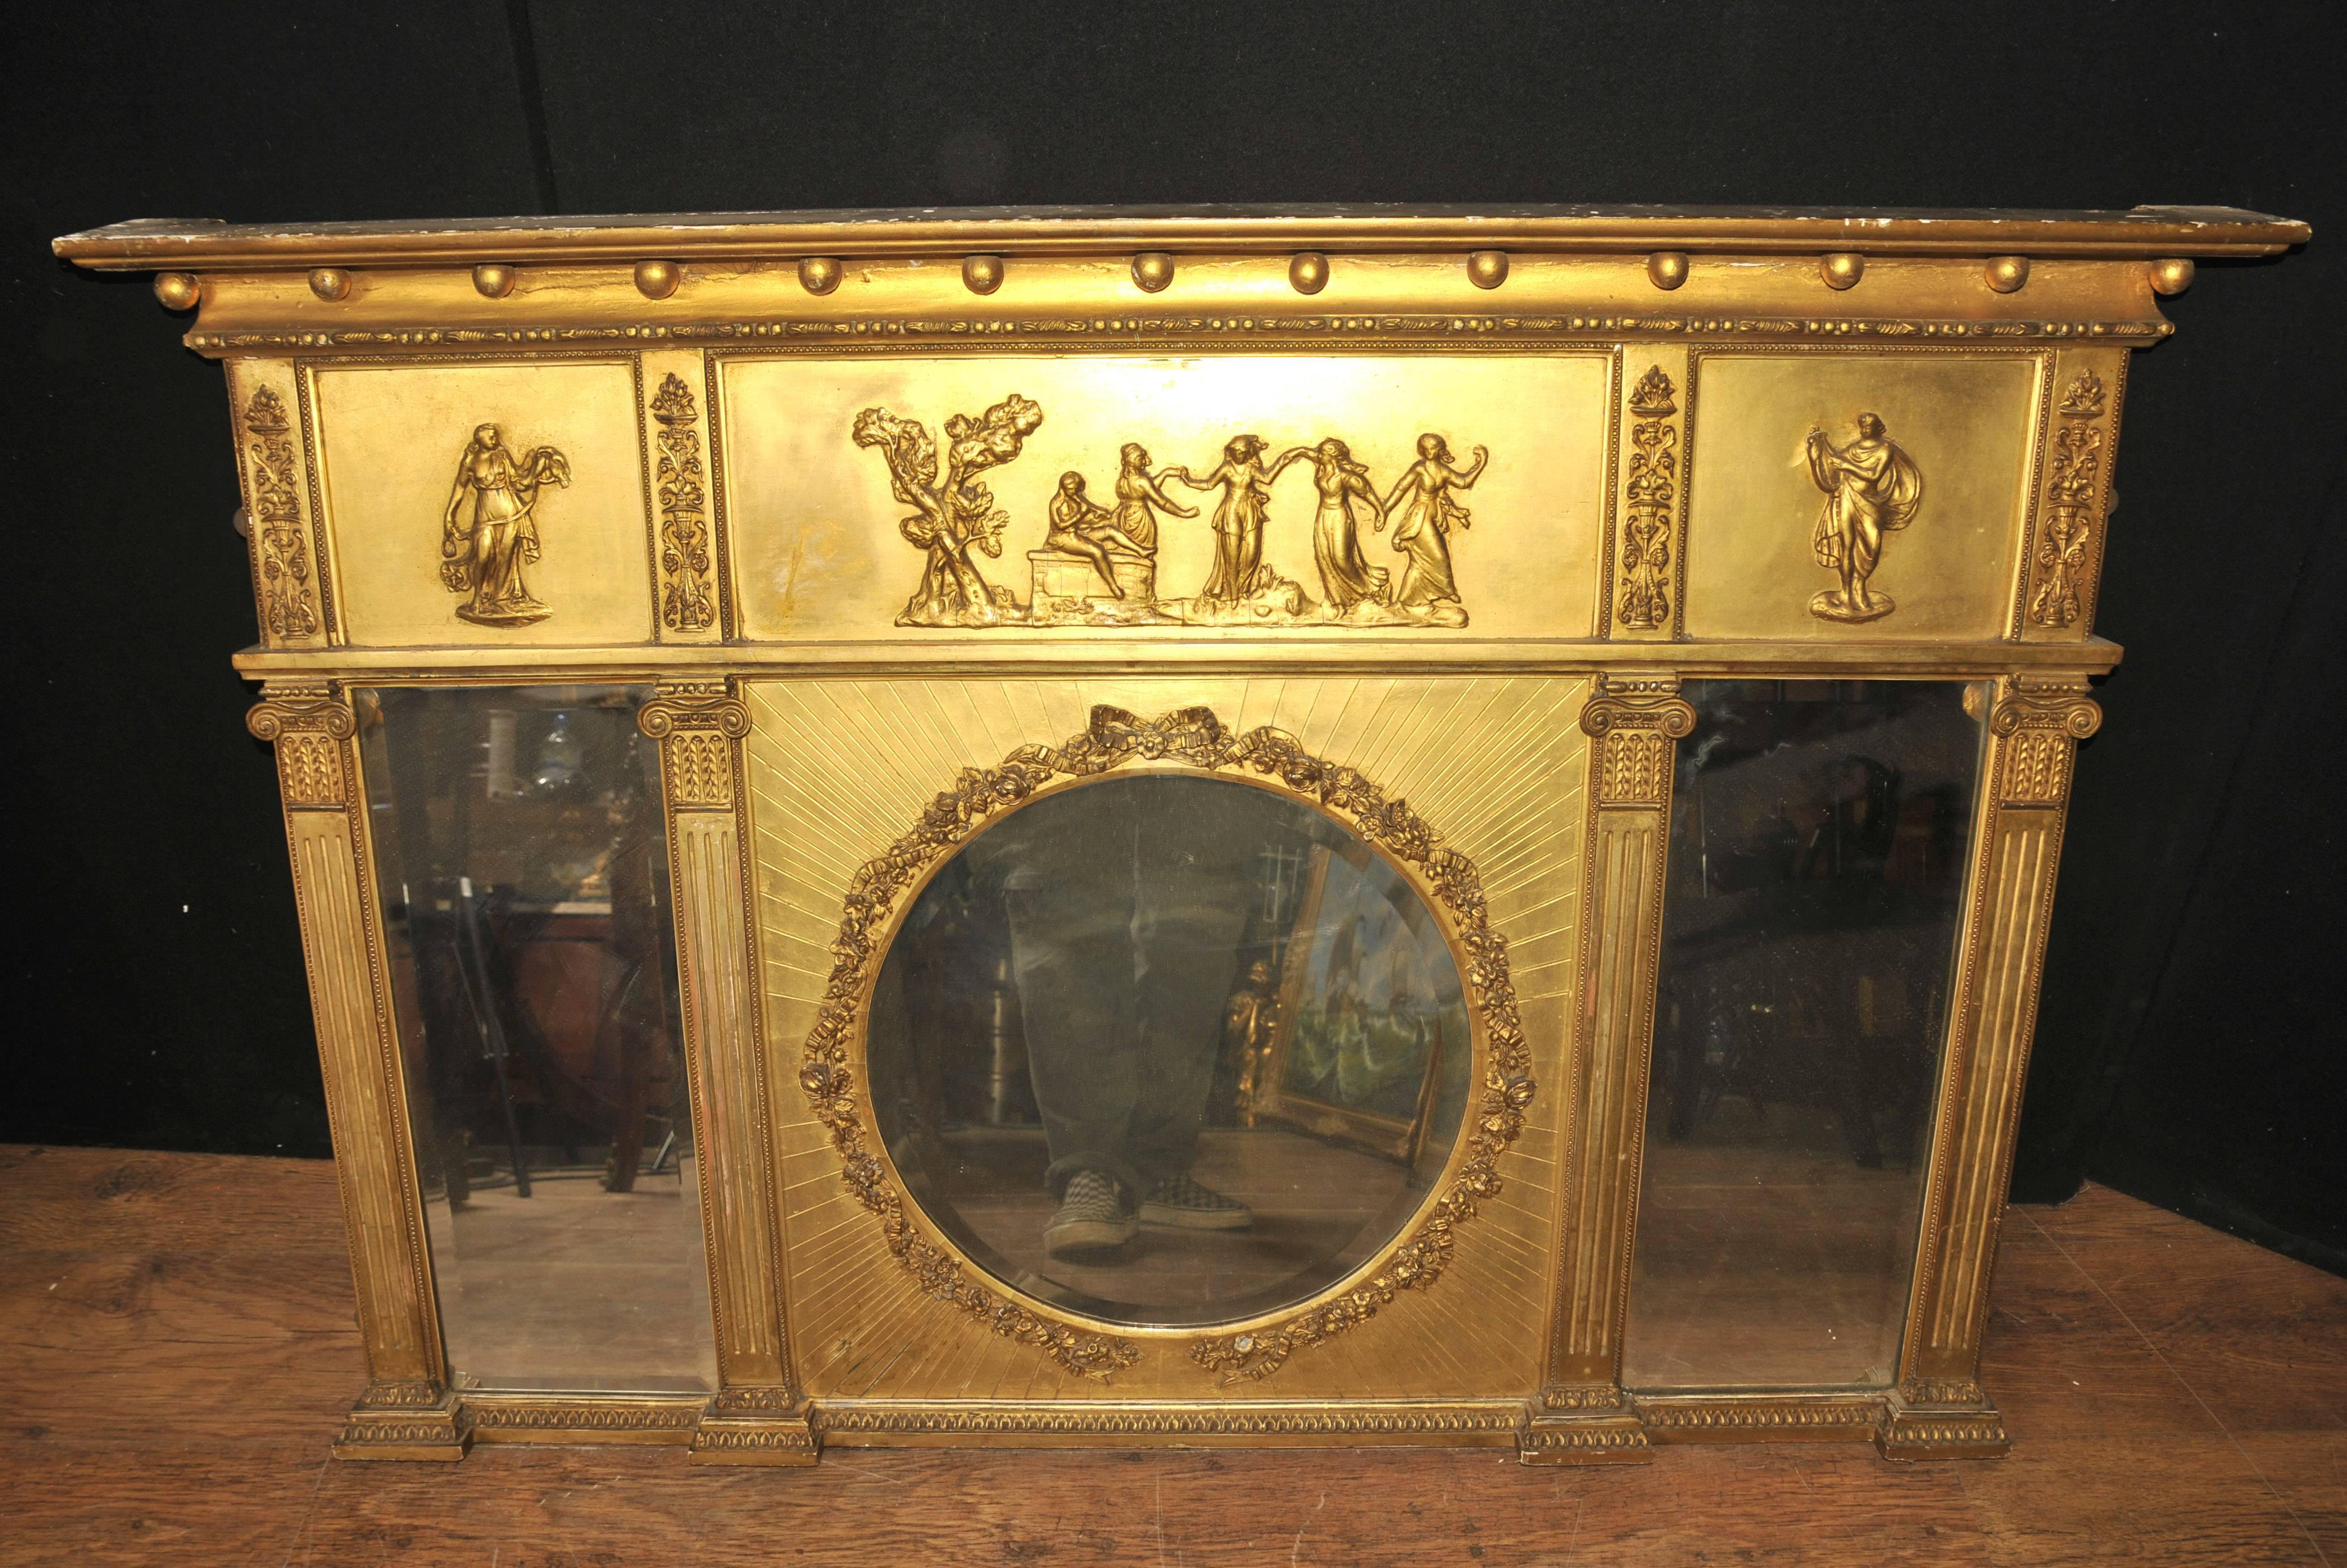 Antique Regency, 1815 Gilt Mantle Mirror English Mirrors In Good Condition For Sale In Potters Bar, Herts